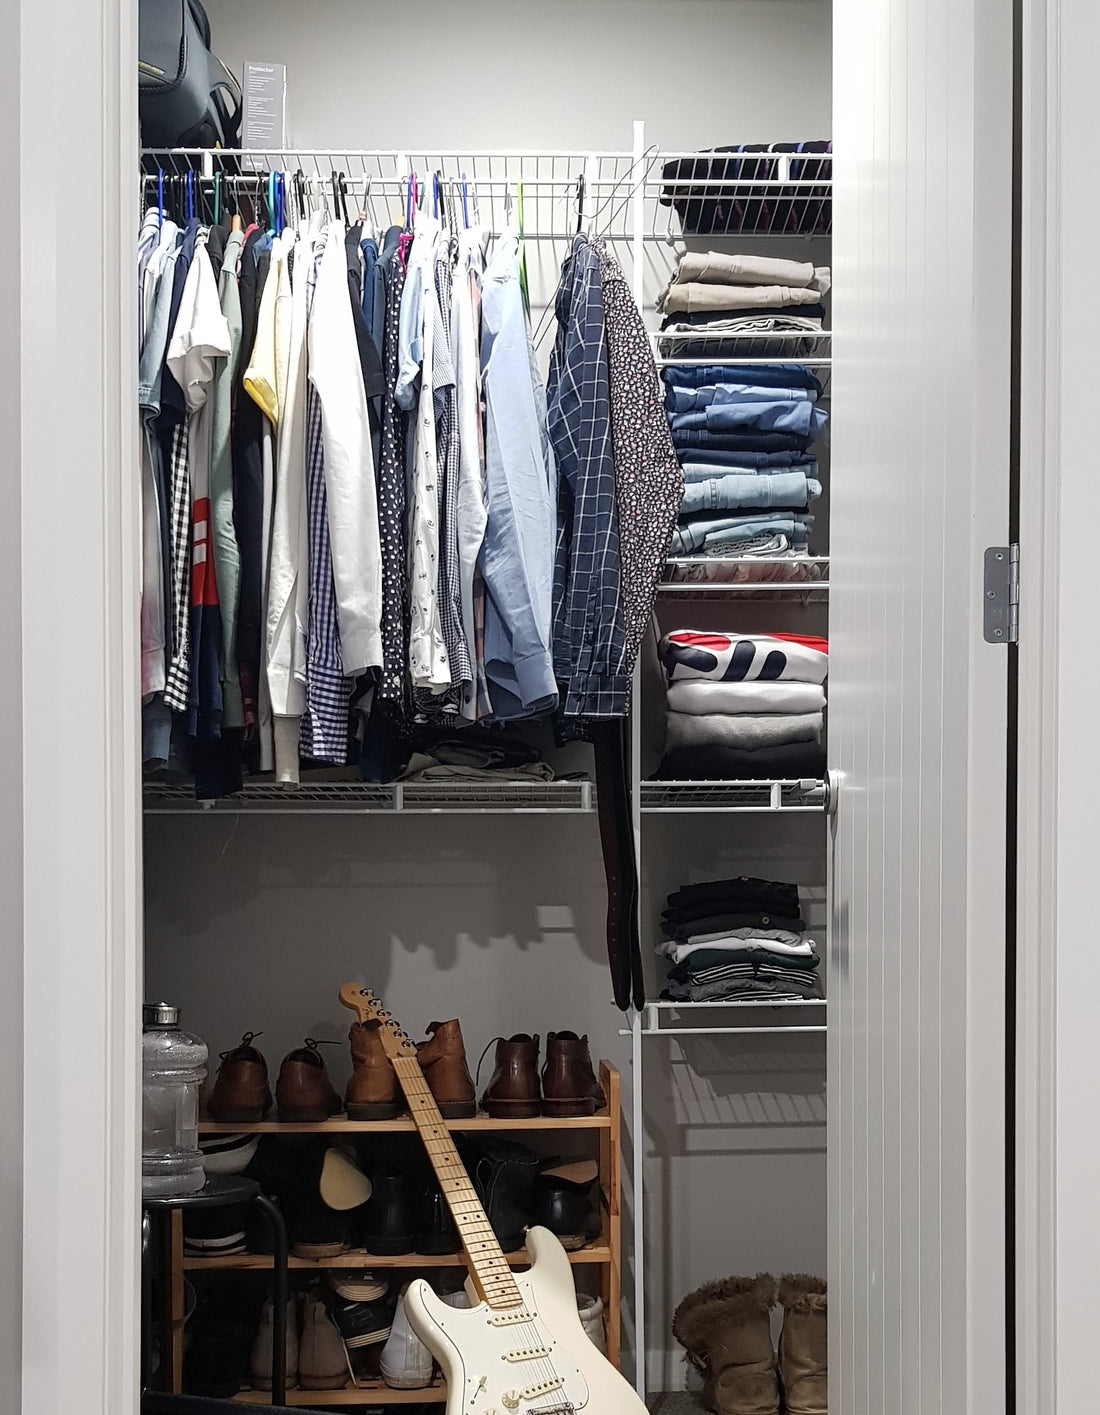 The Ultimate Guide to Organizing Your Closet